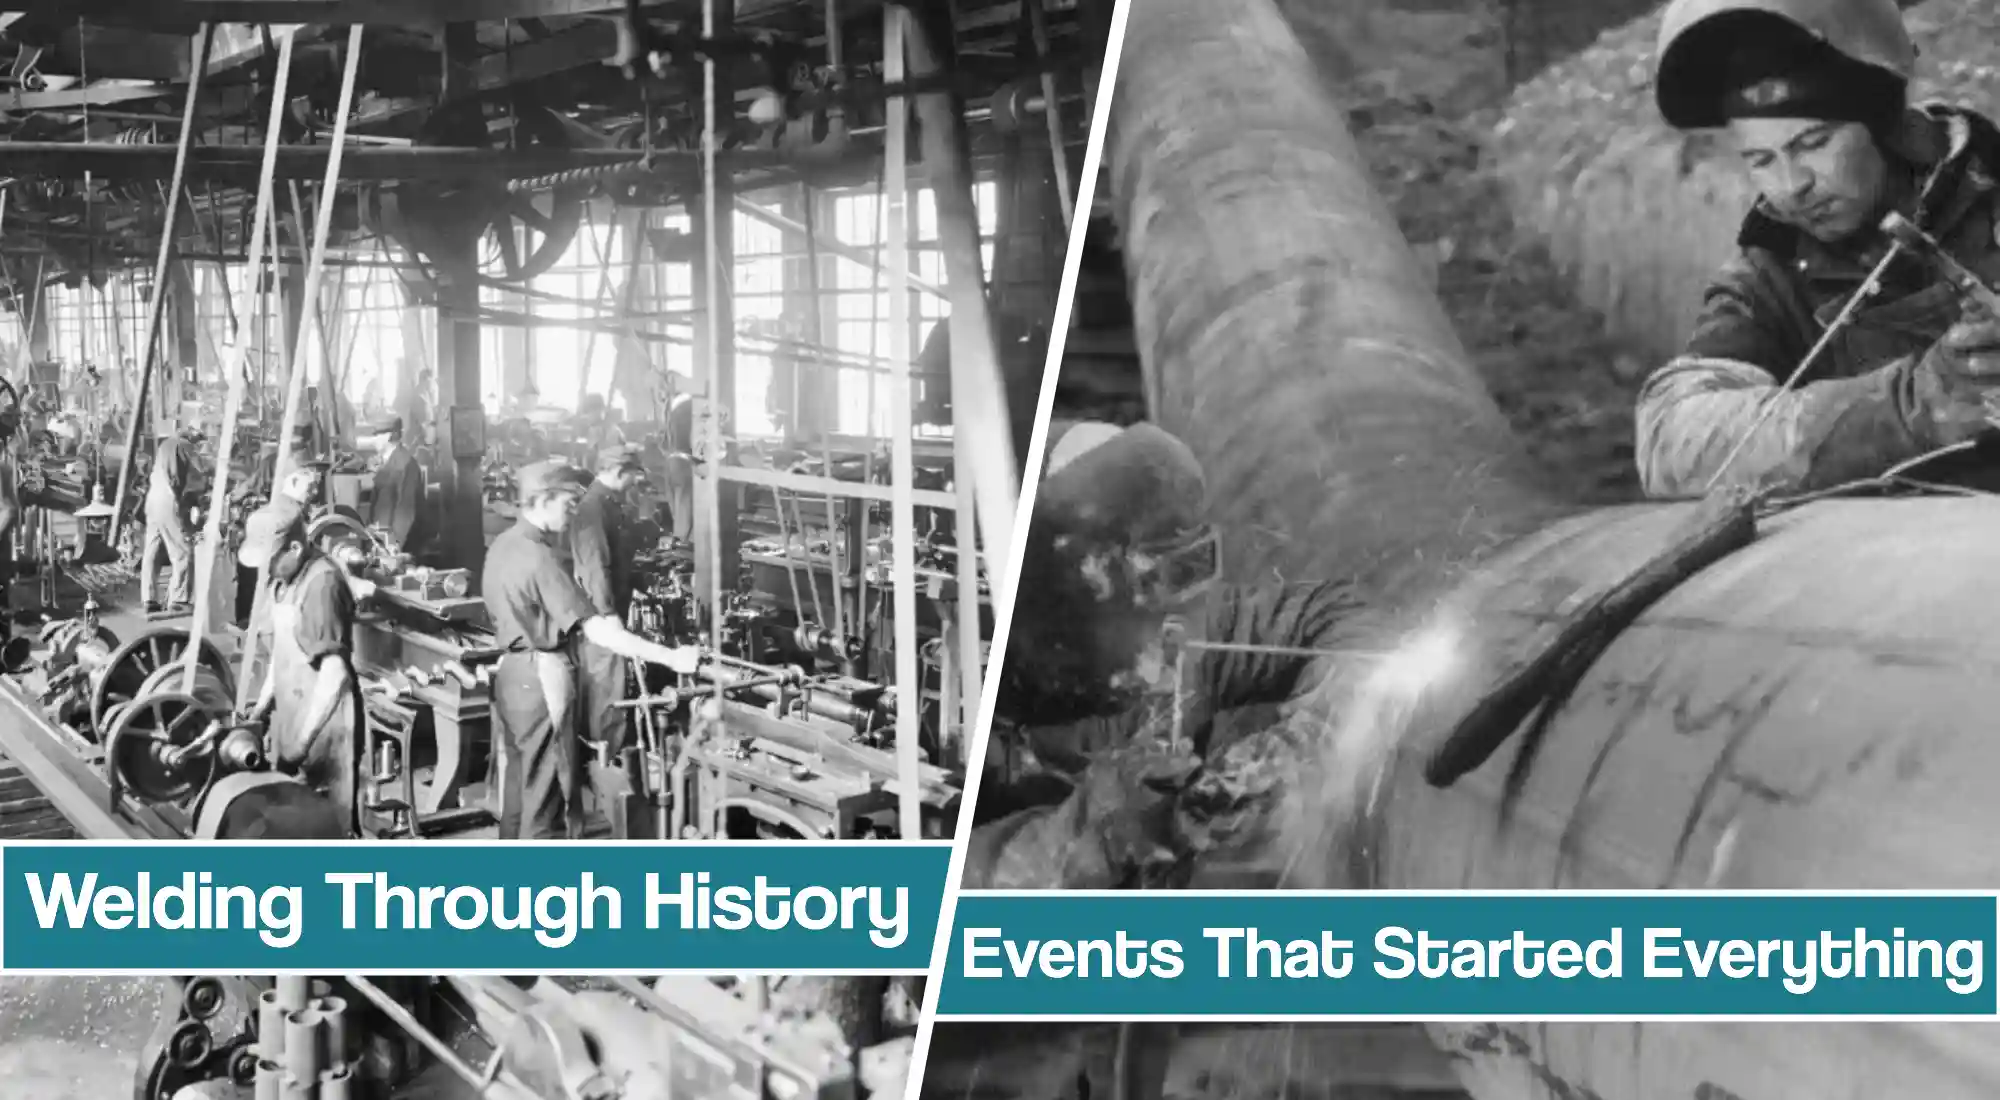 Welding Through History: Historical events that dawn the new age